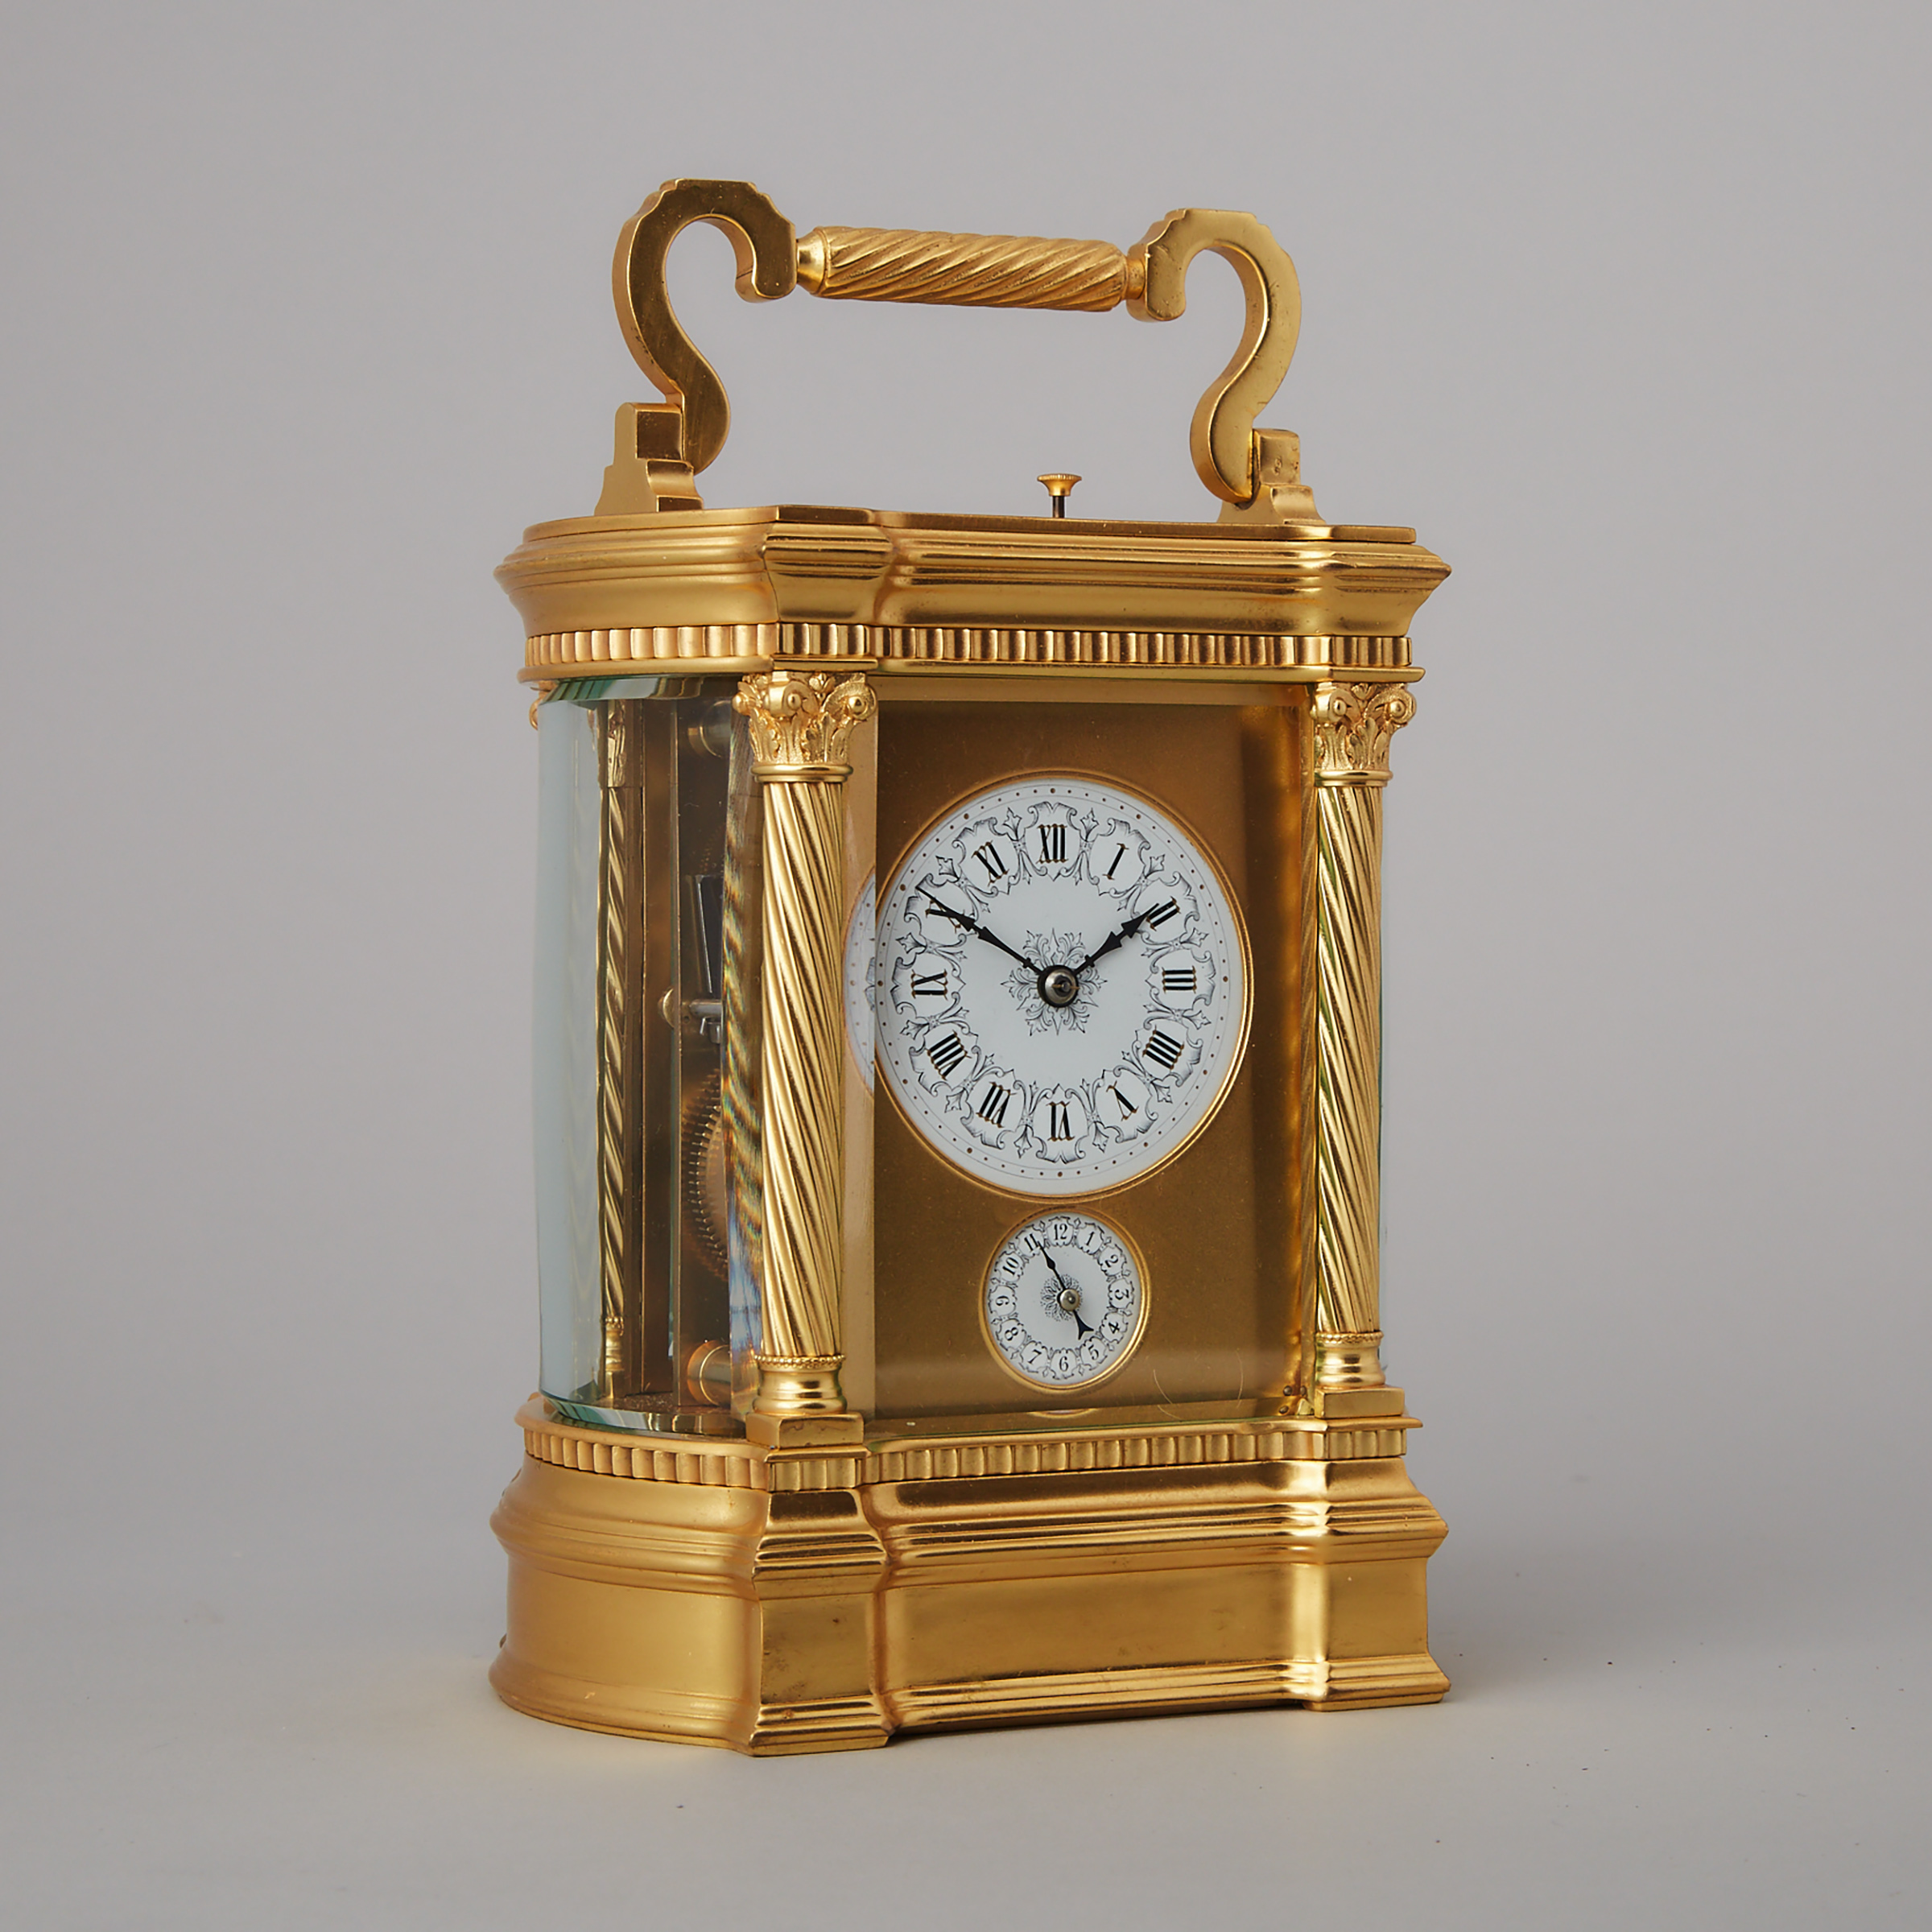 Victoria, Princess Royal and Frederick William III Presentation French Repeating Carriage Clock with Alarm, c.1880